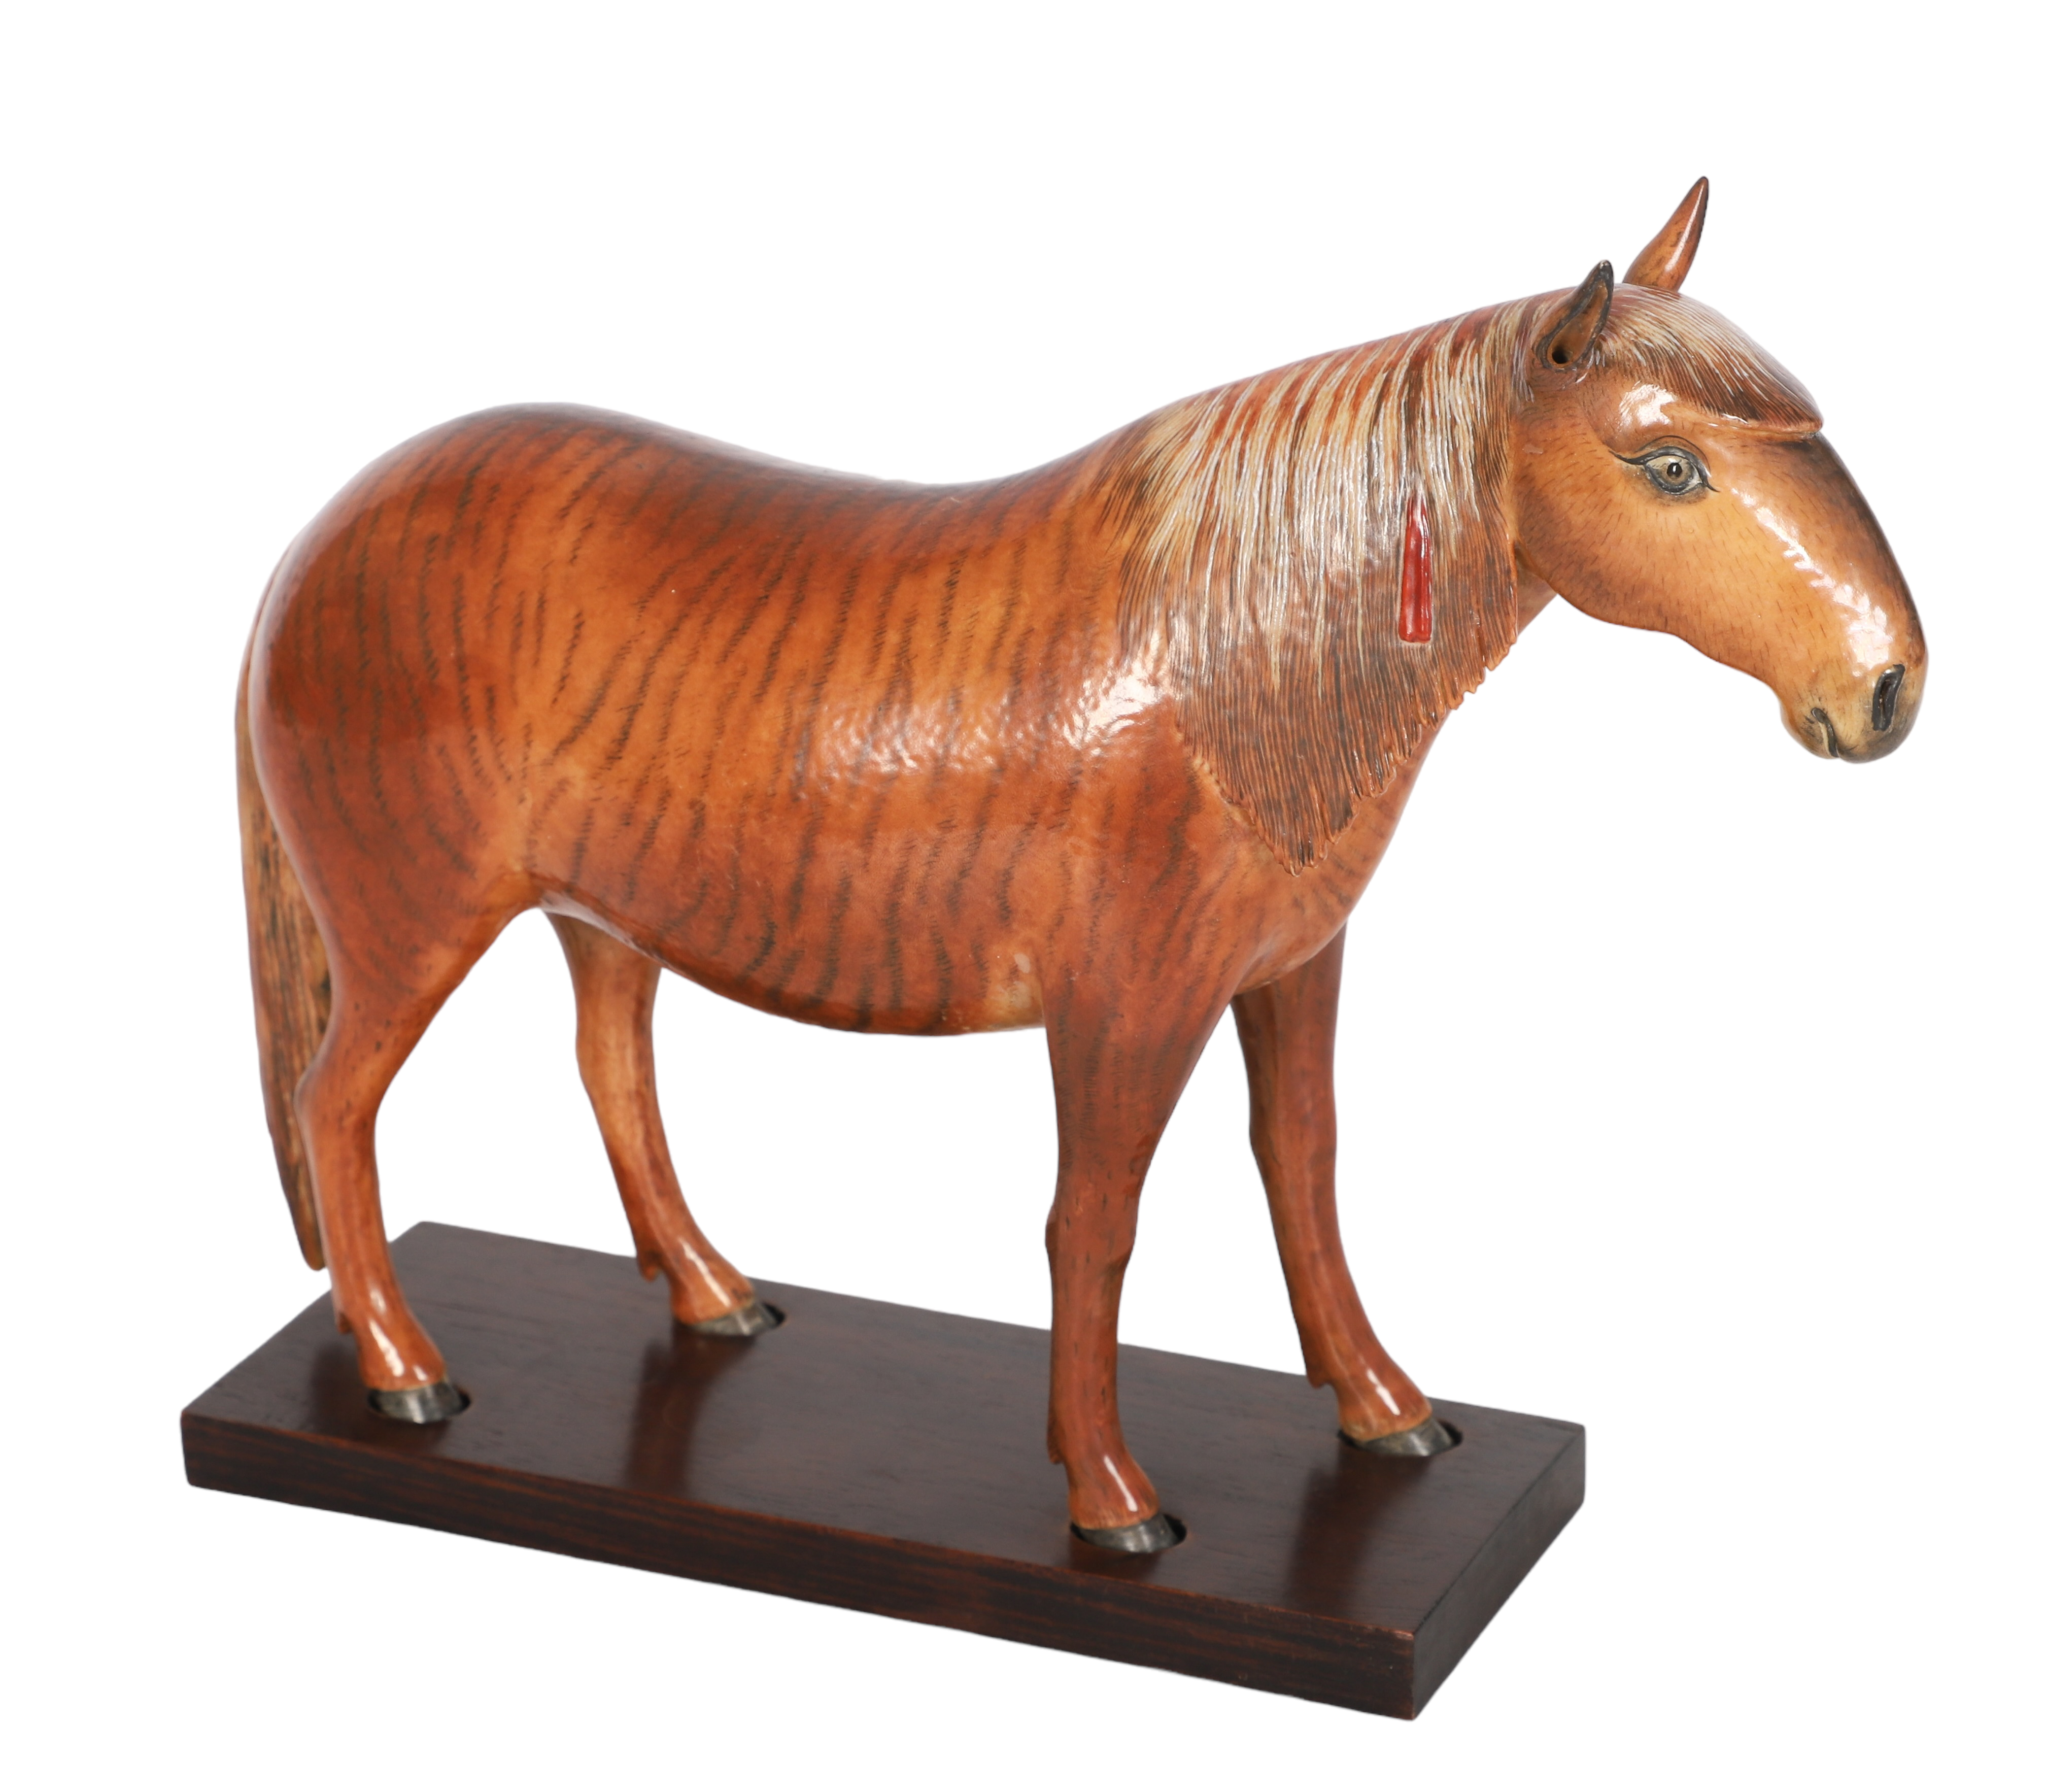 Chinese export porcelain horse 3091ae